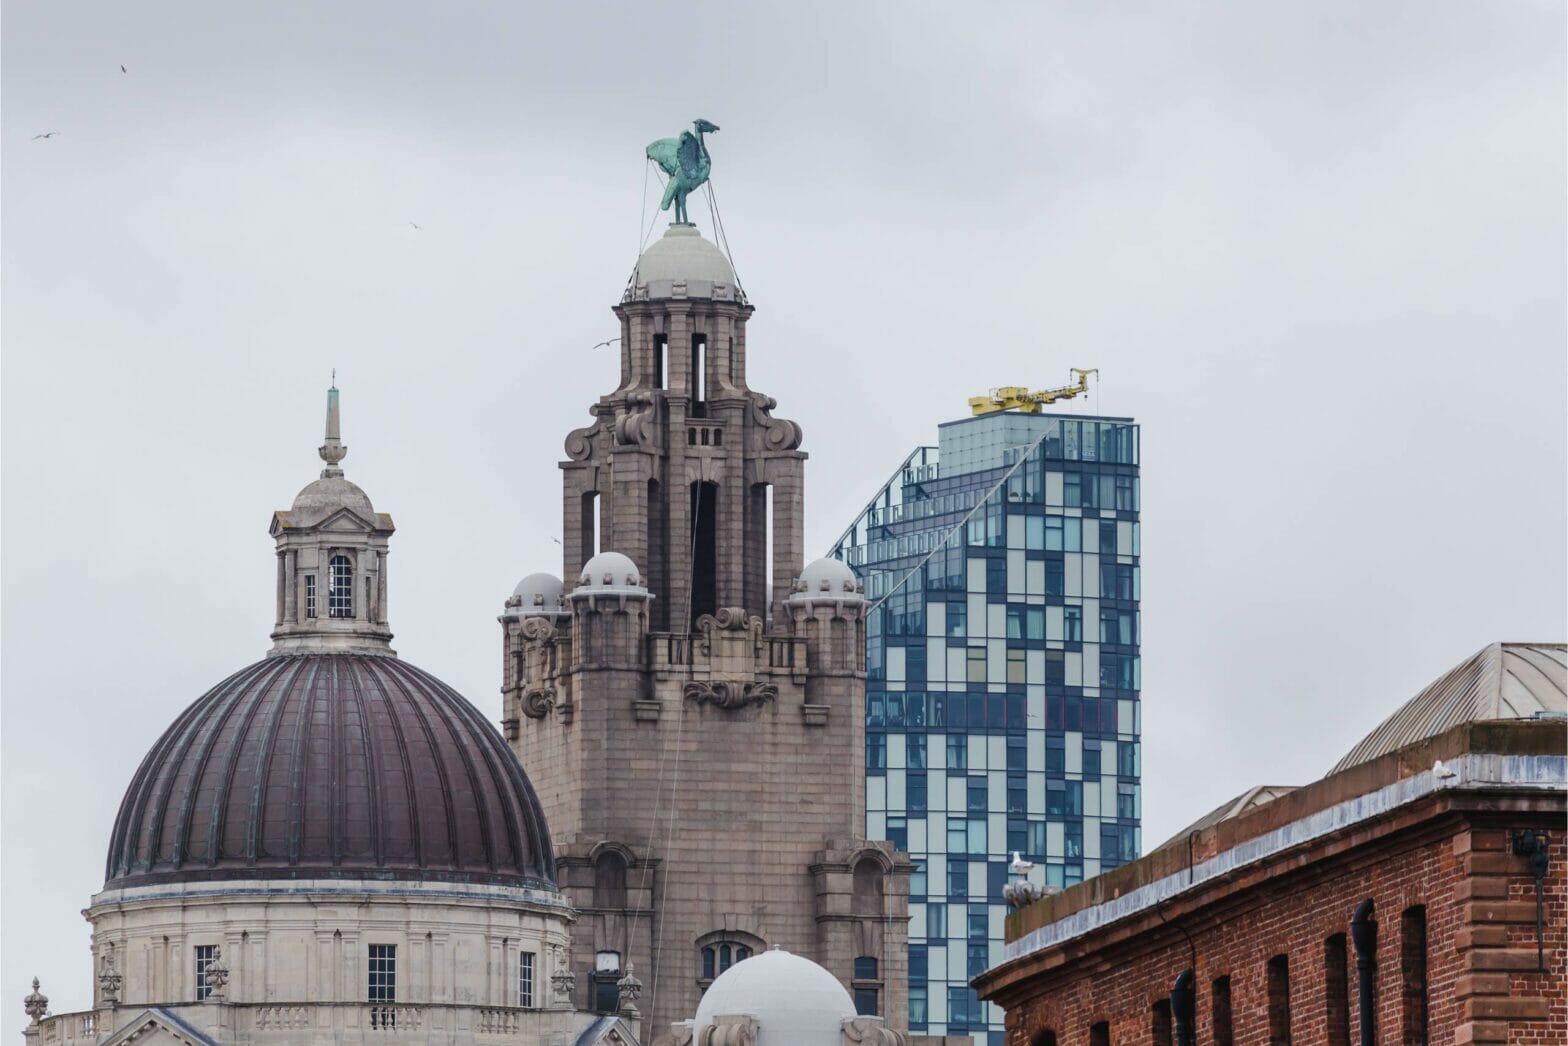 Liverpool Unity Building, protected by Hyfire Taurus Wireless Fire System